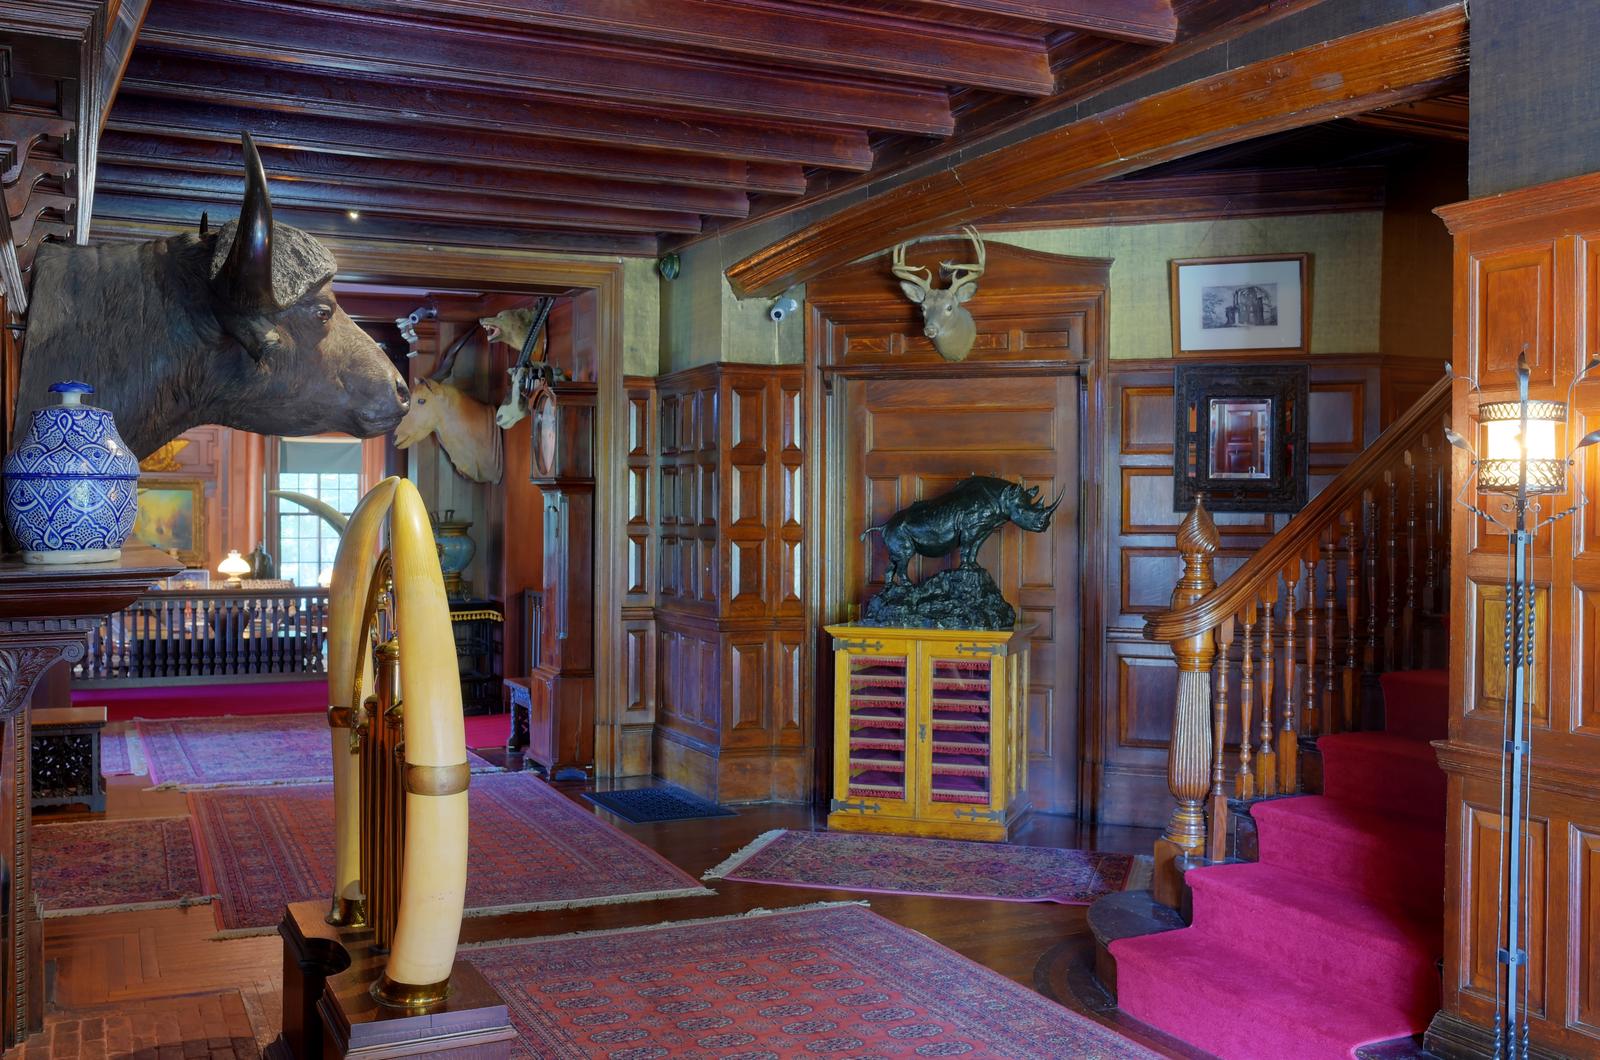 A hall wall with hunting trophies, oak paneled walls, and a staircase.